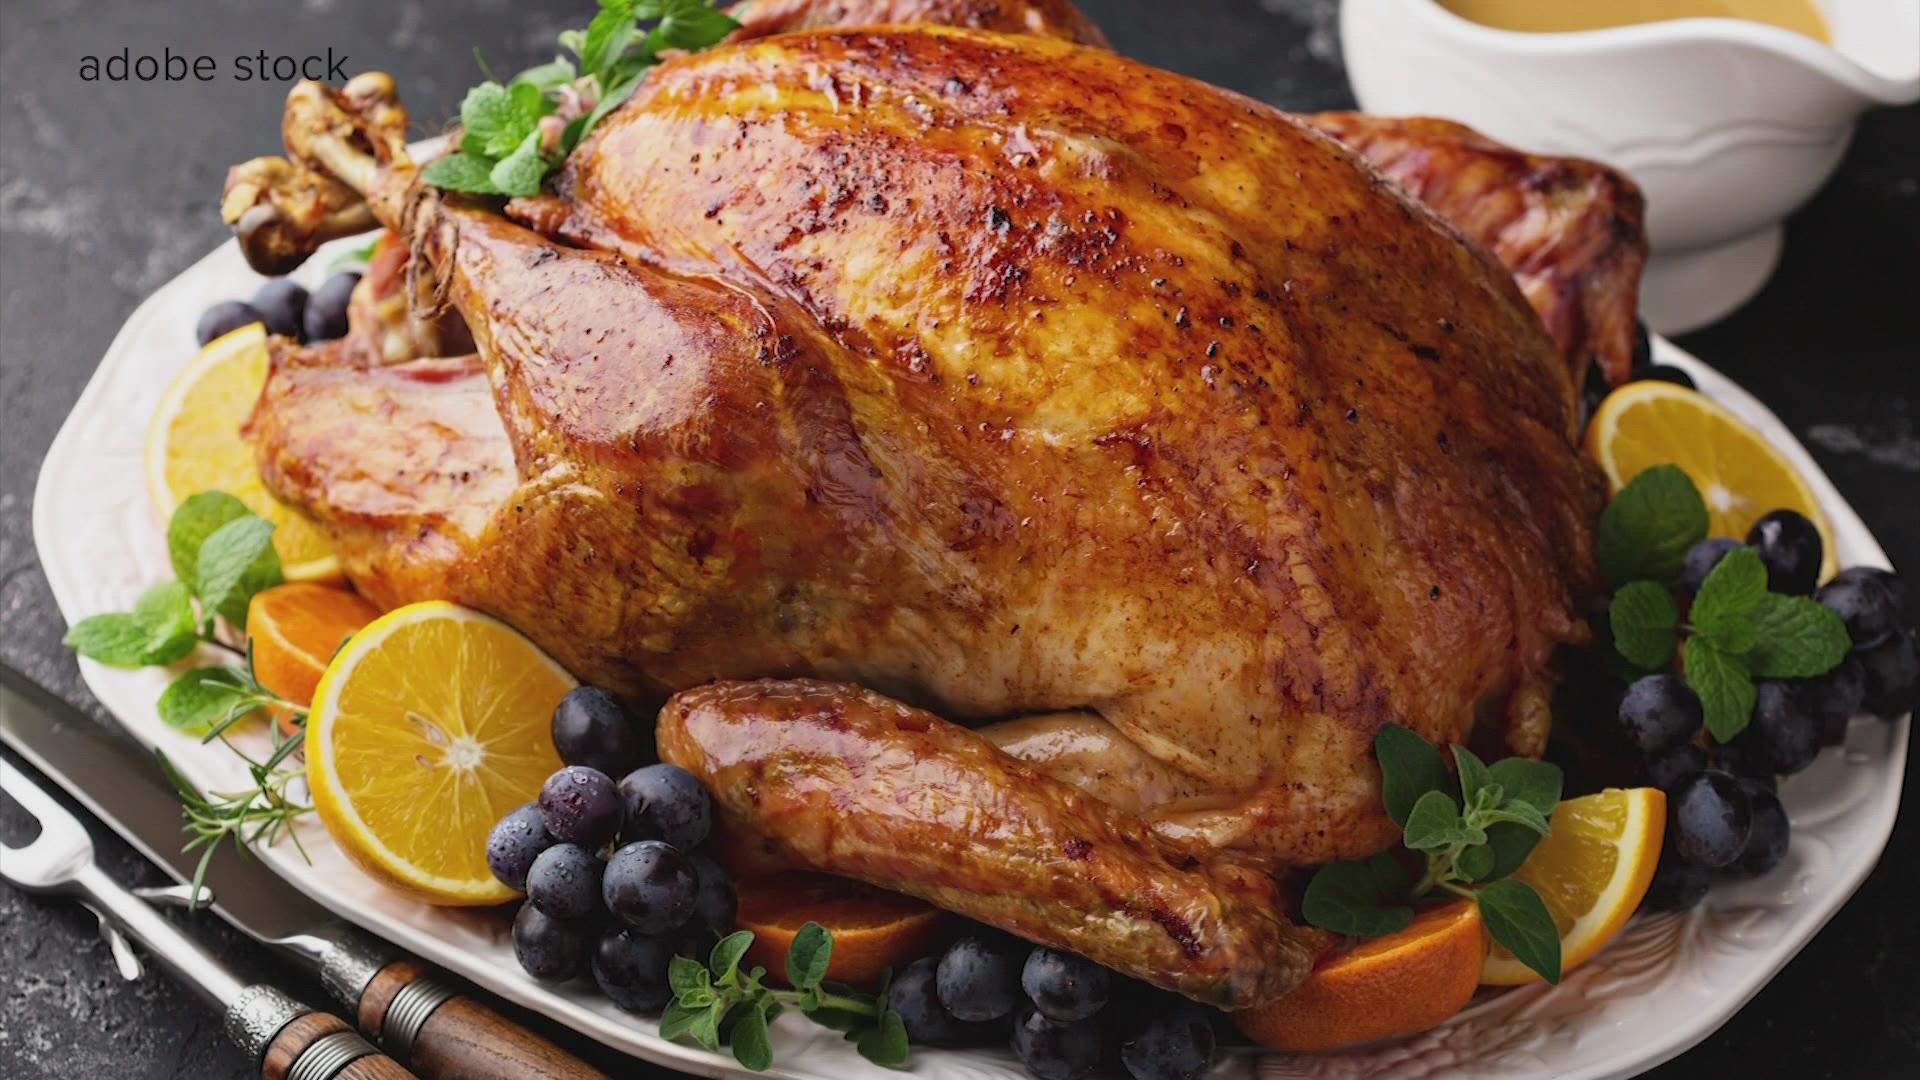 Believe it or not, it's possible to cook a turkey in a microwave. But experts say it depends on how big your bird is and how much power you're using to cook it.